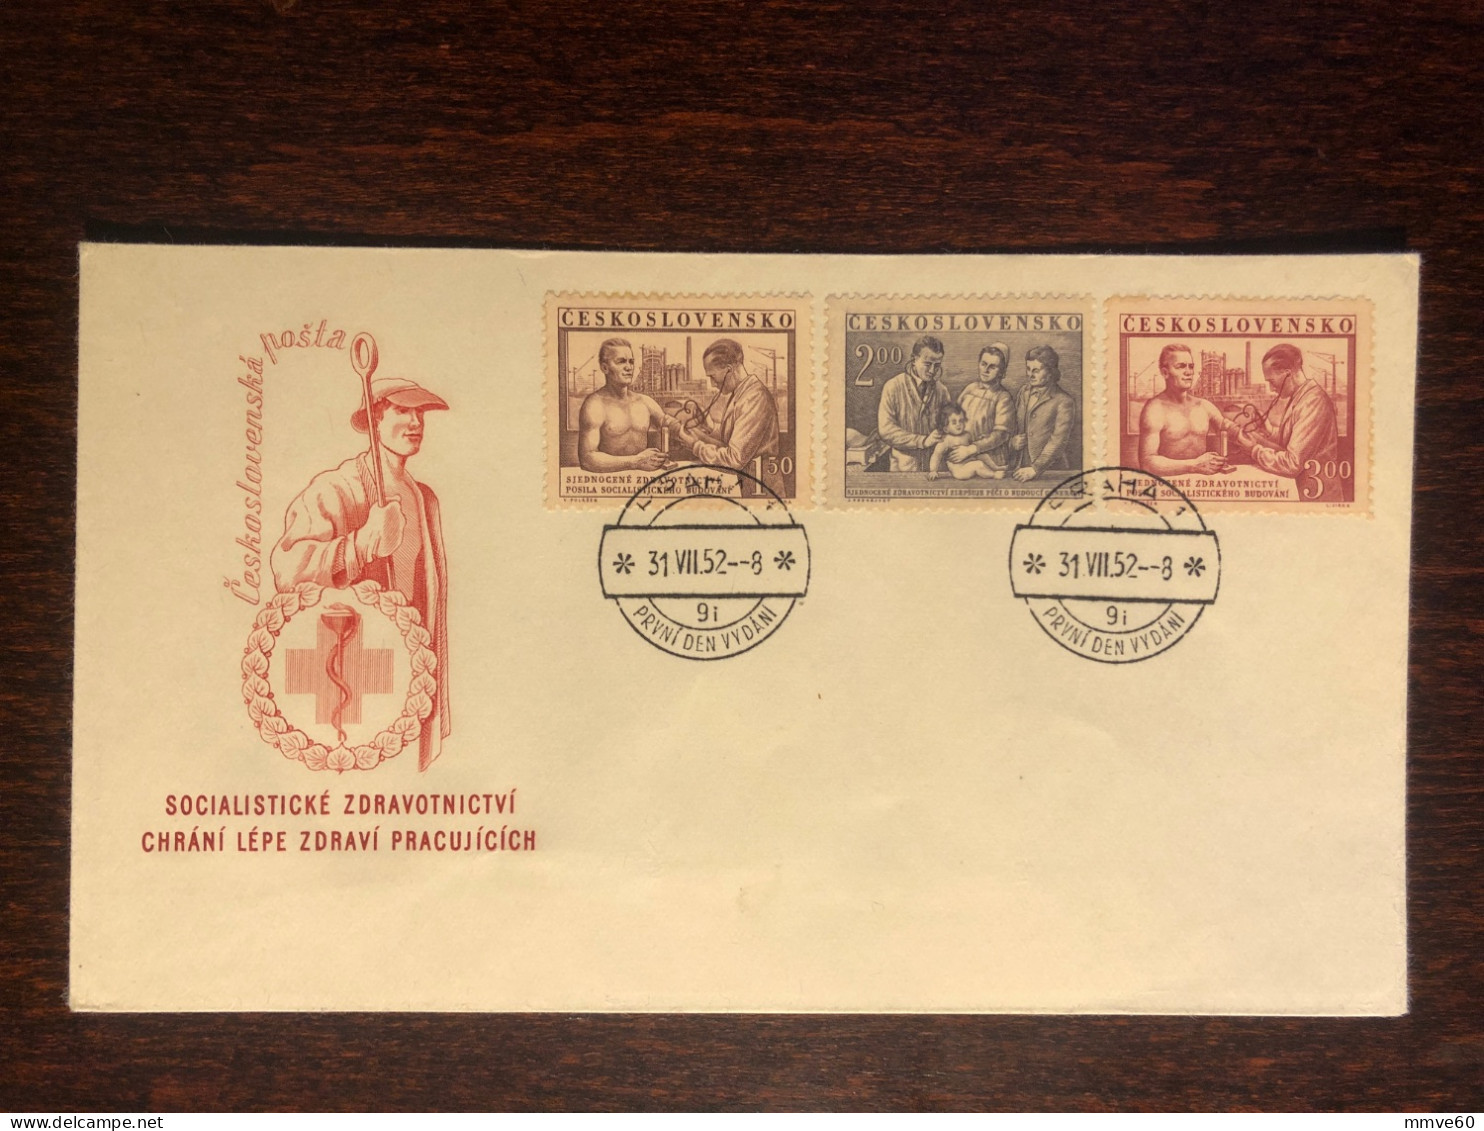 CZECHOSLOVAKIA FDC COVER 1952 YEAR RED CROSS HEALTH MEDICINE STAMPS - FDC